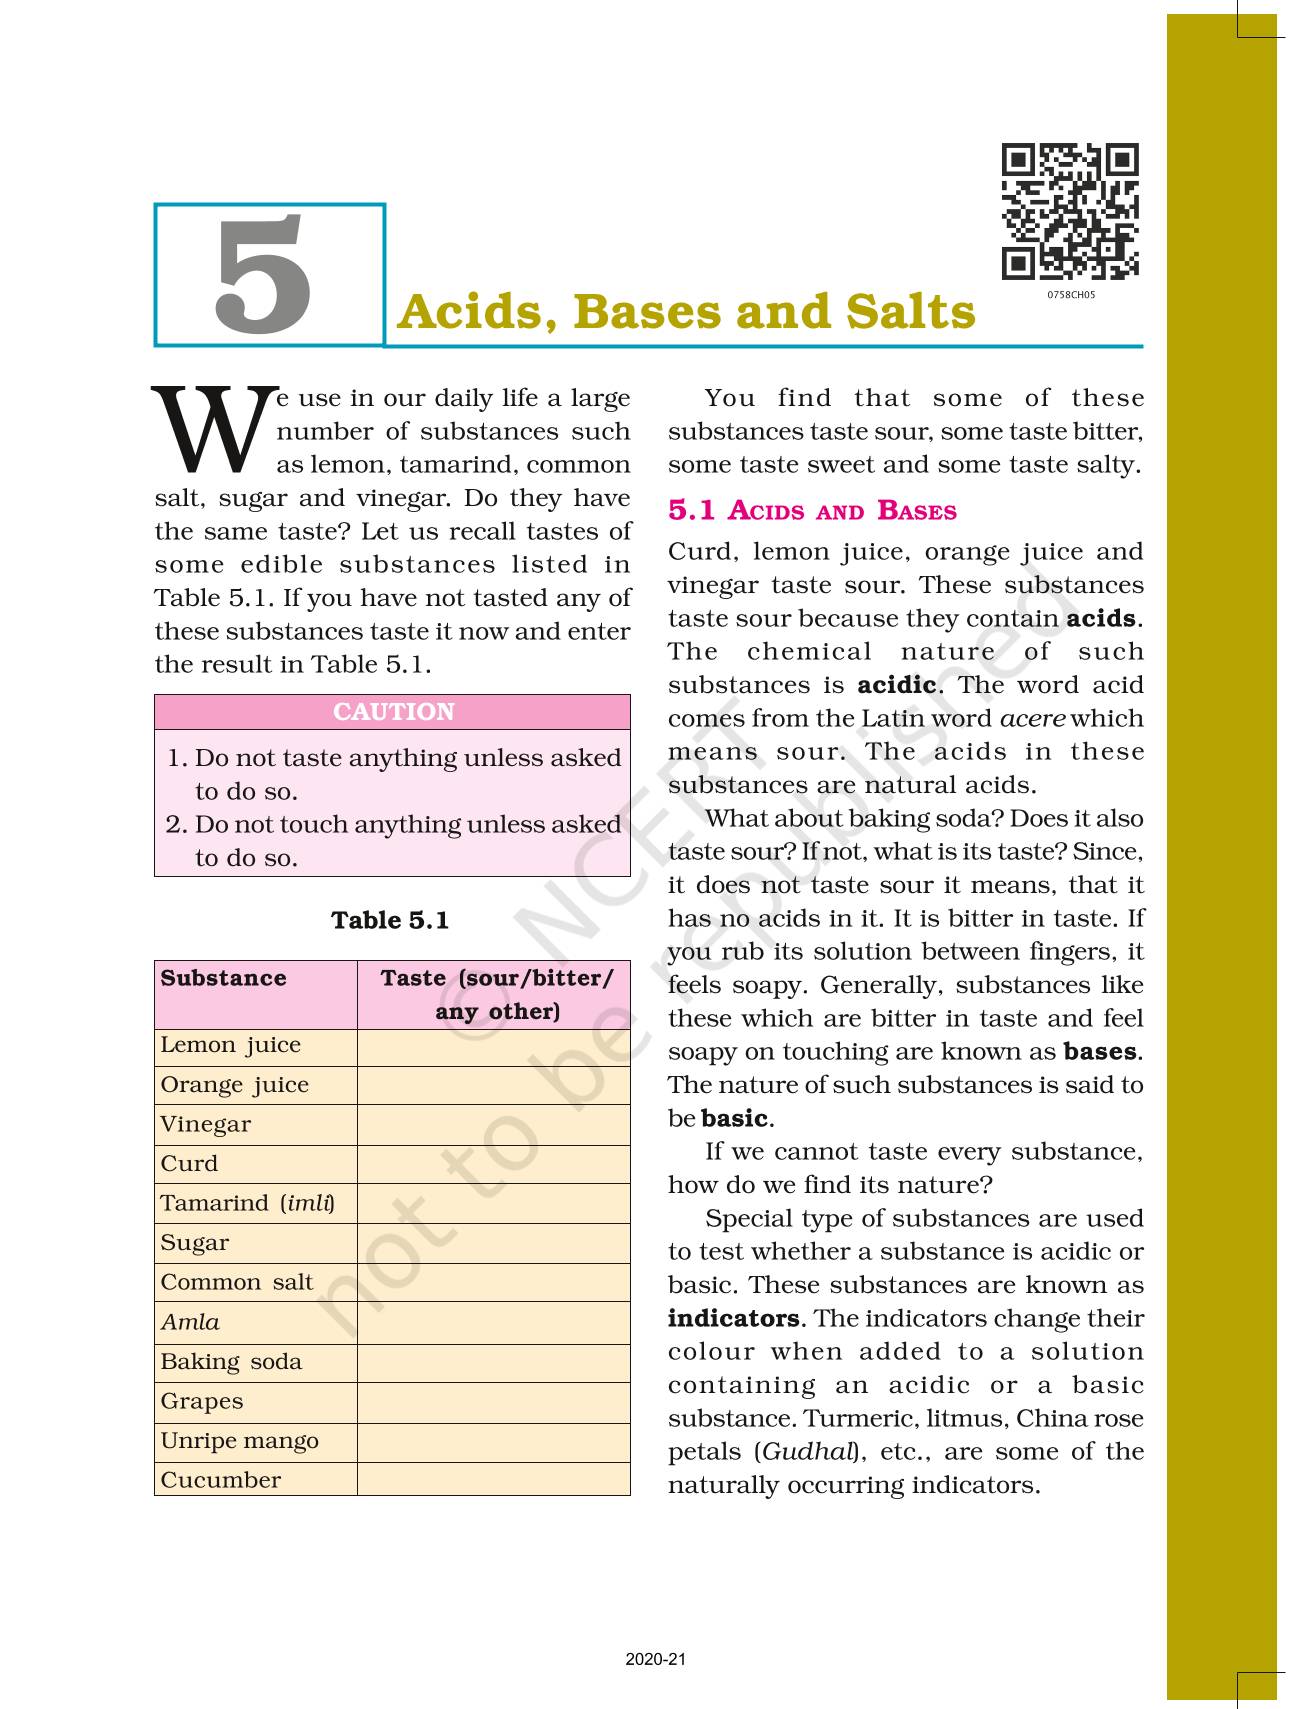 assignment on acids bases and salts